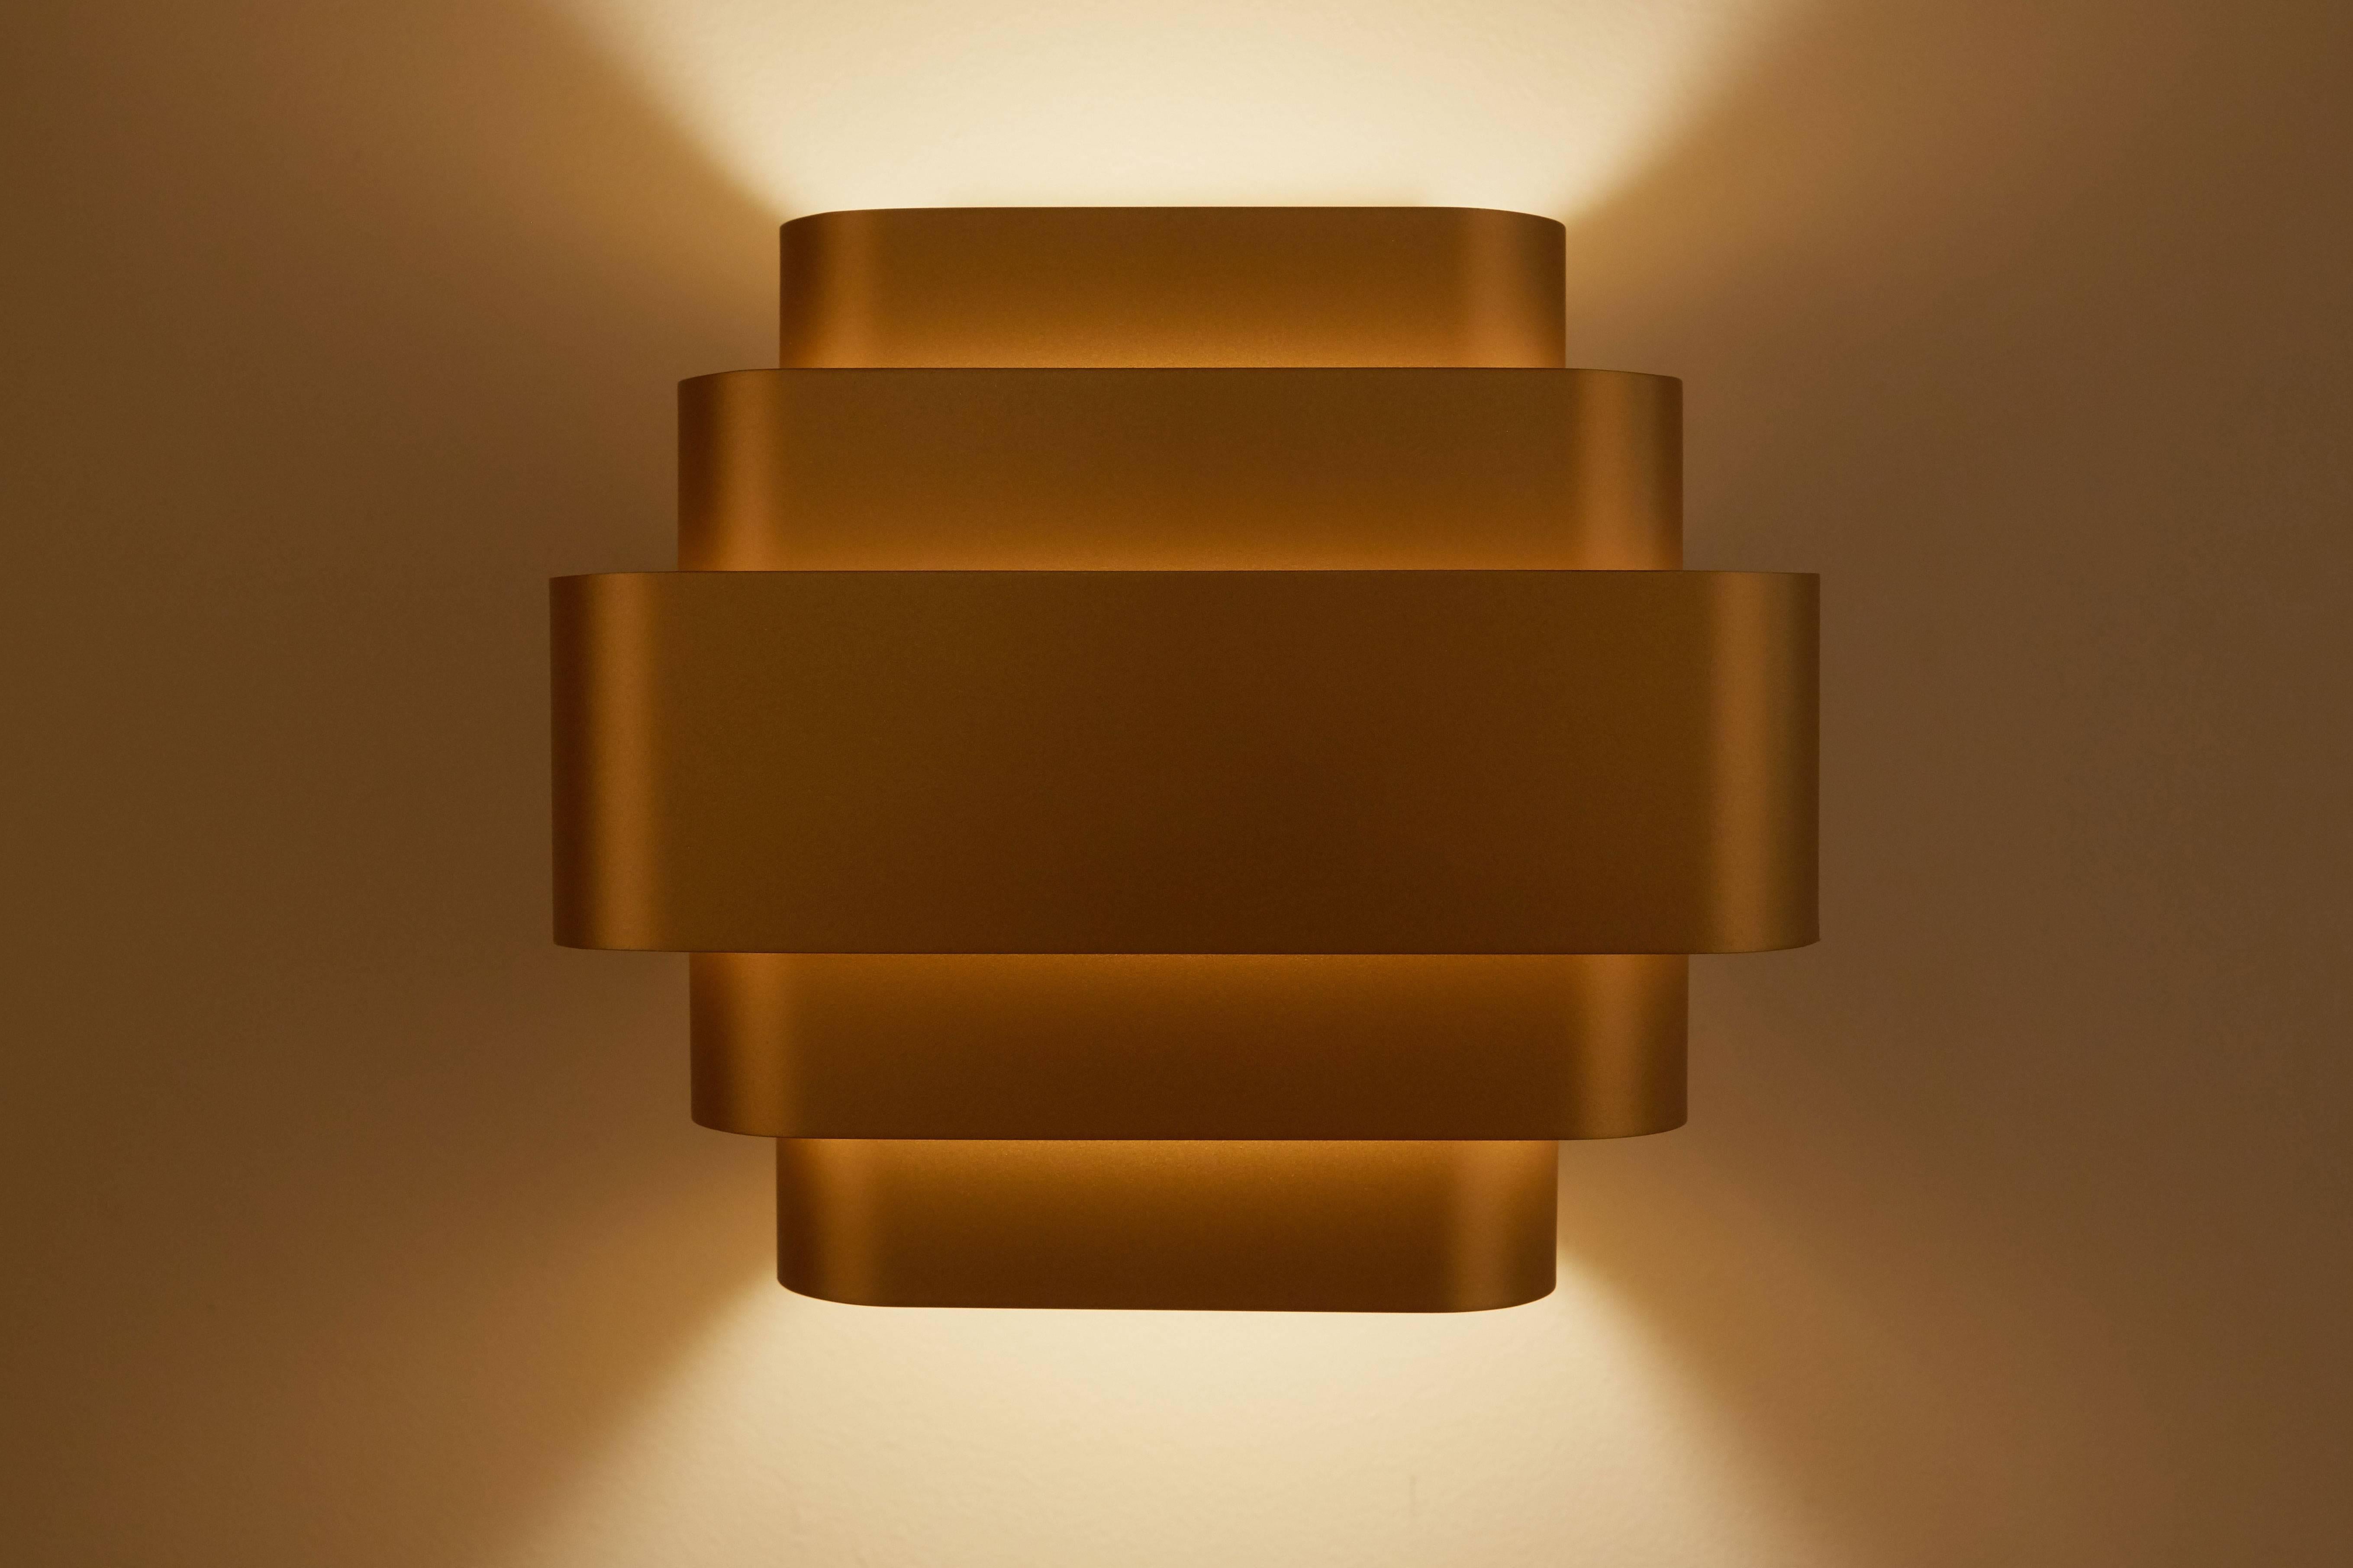 Brass sconces originally designed by Jules Wabbes, circa 1960s. These current productions are manufactured in Belgium. Made from anodized brass colored gilt aluminium. The five anodized aluminum strips provide diffused light at top and bottom. Wired